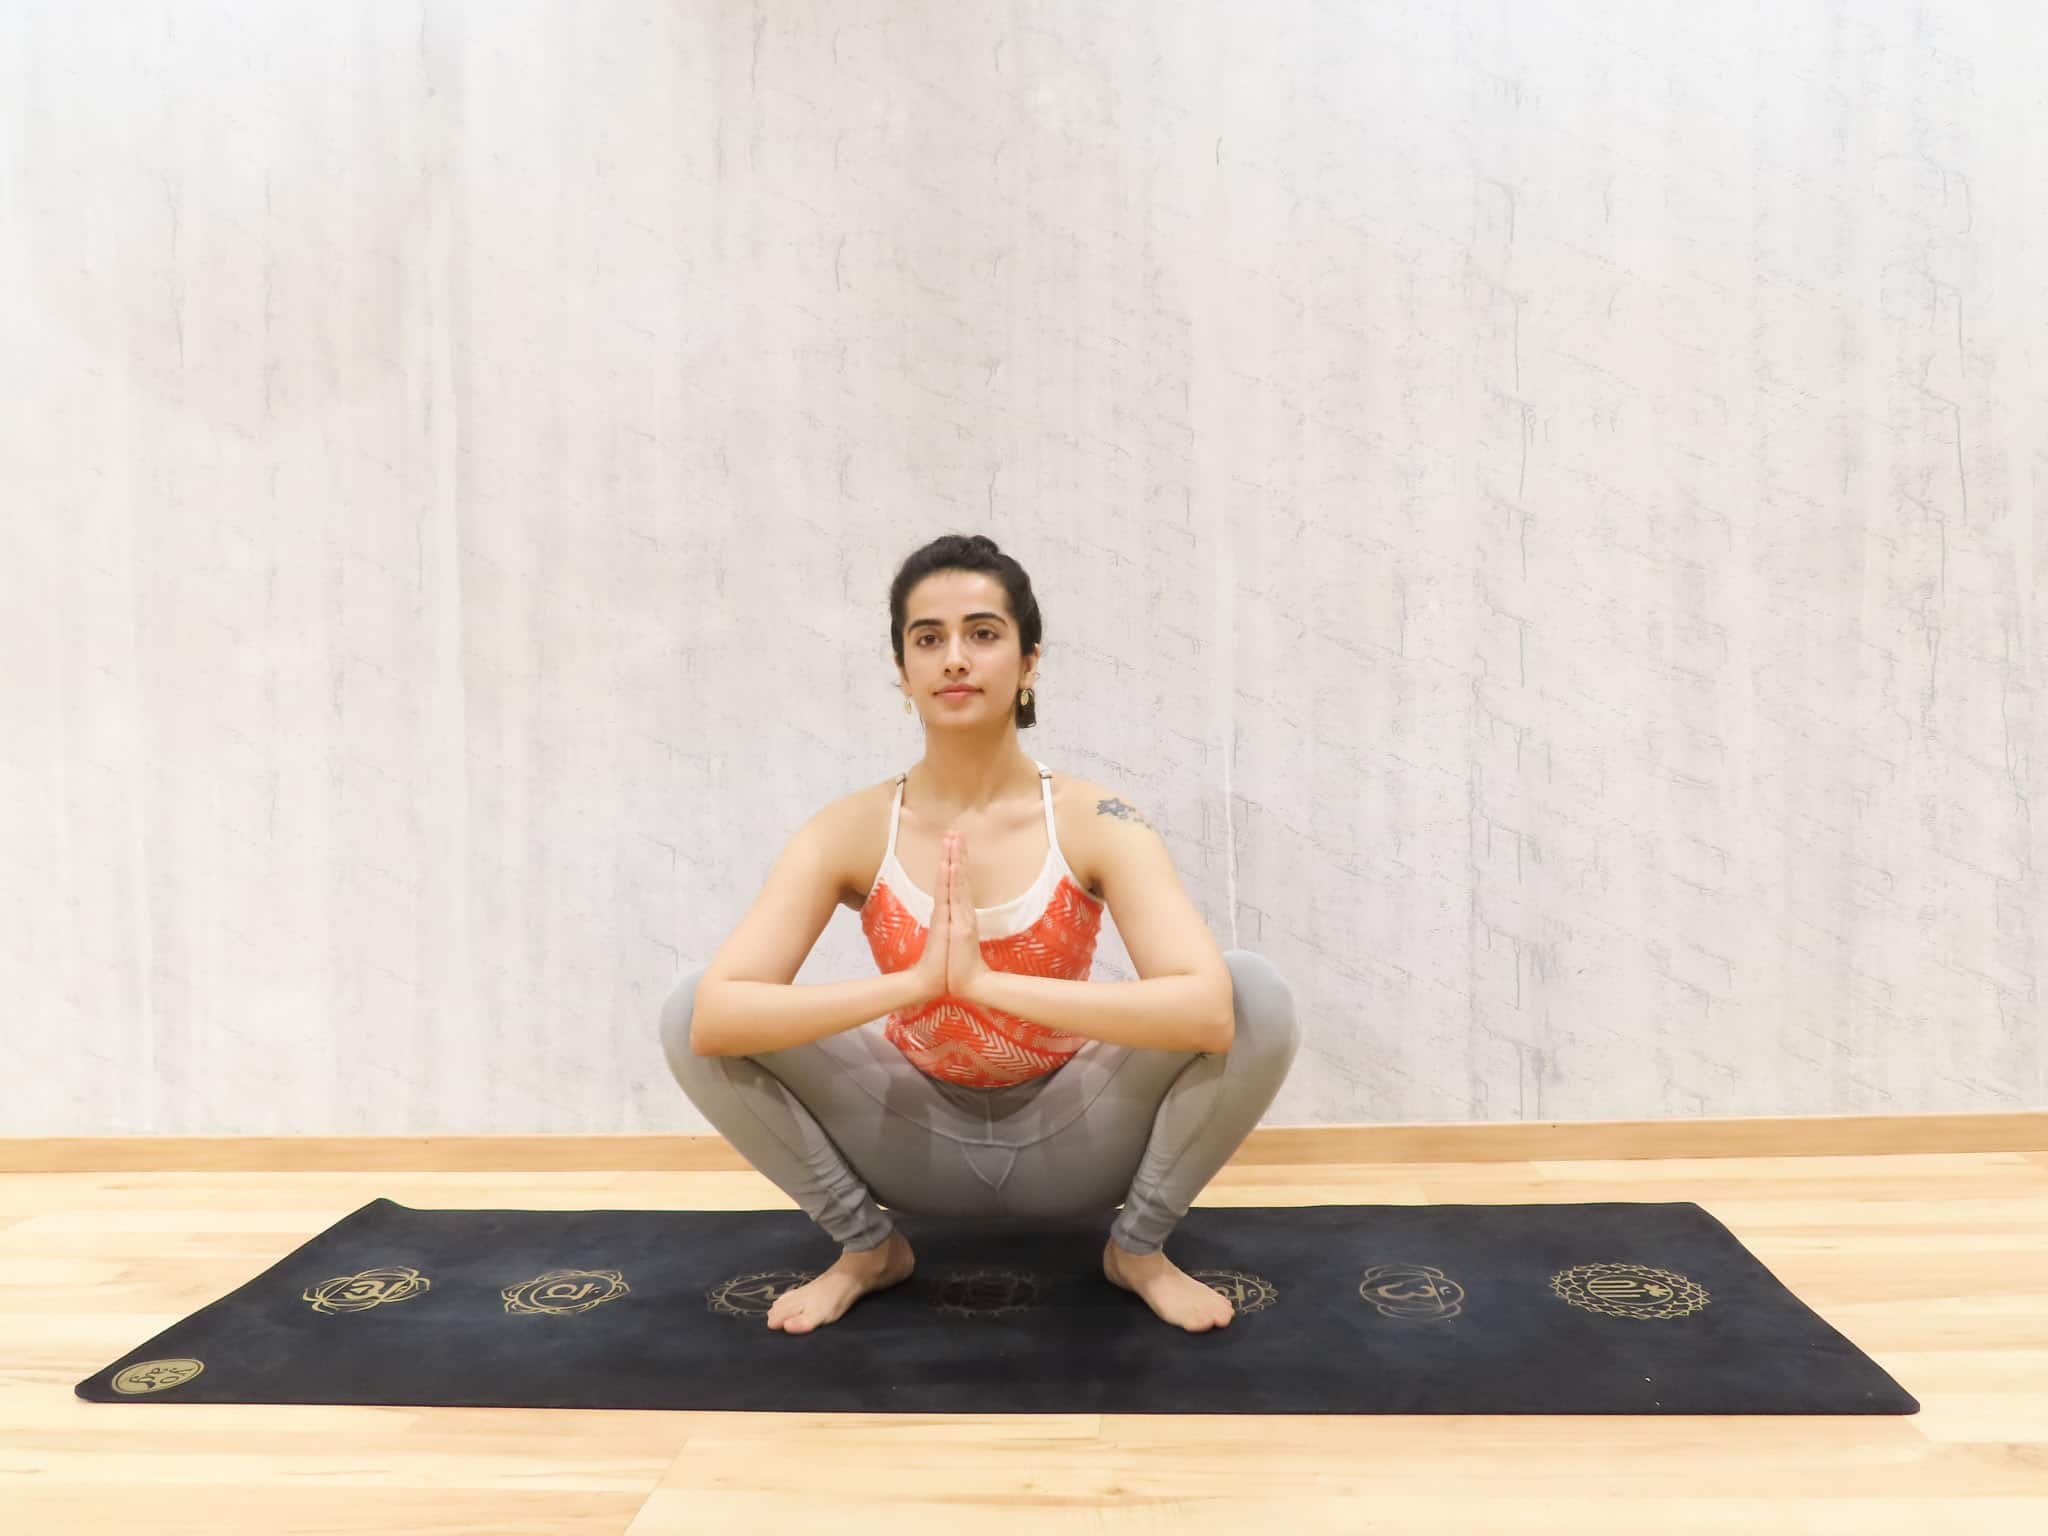 Safe Prenatal Yoga Poses For Your Second Trimester